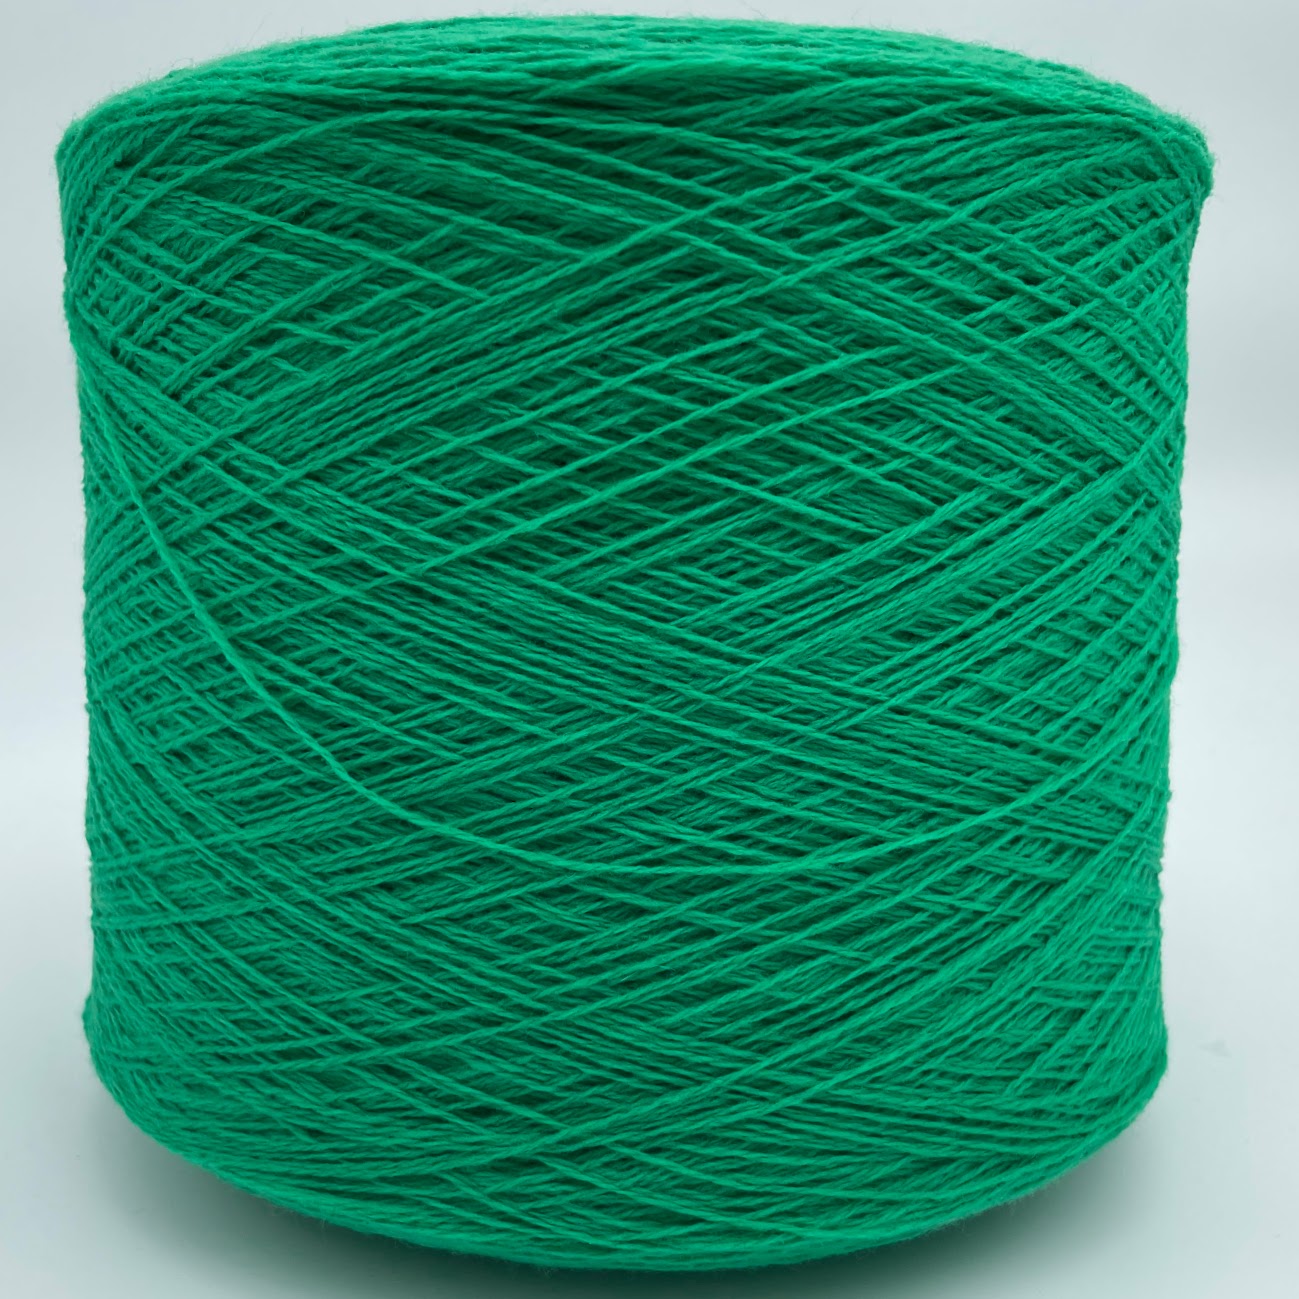 100% Cashmere Yarn - Deadstock Yarn - Made in Italy -  Kelly Green - Lace Weight  - 100g